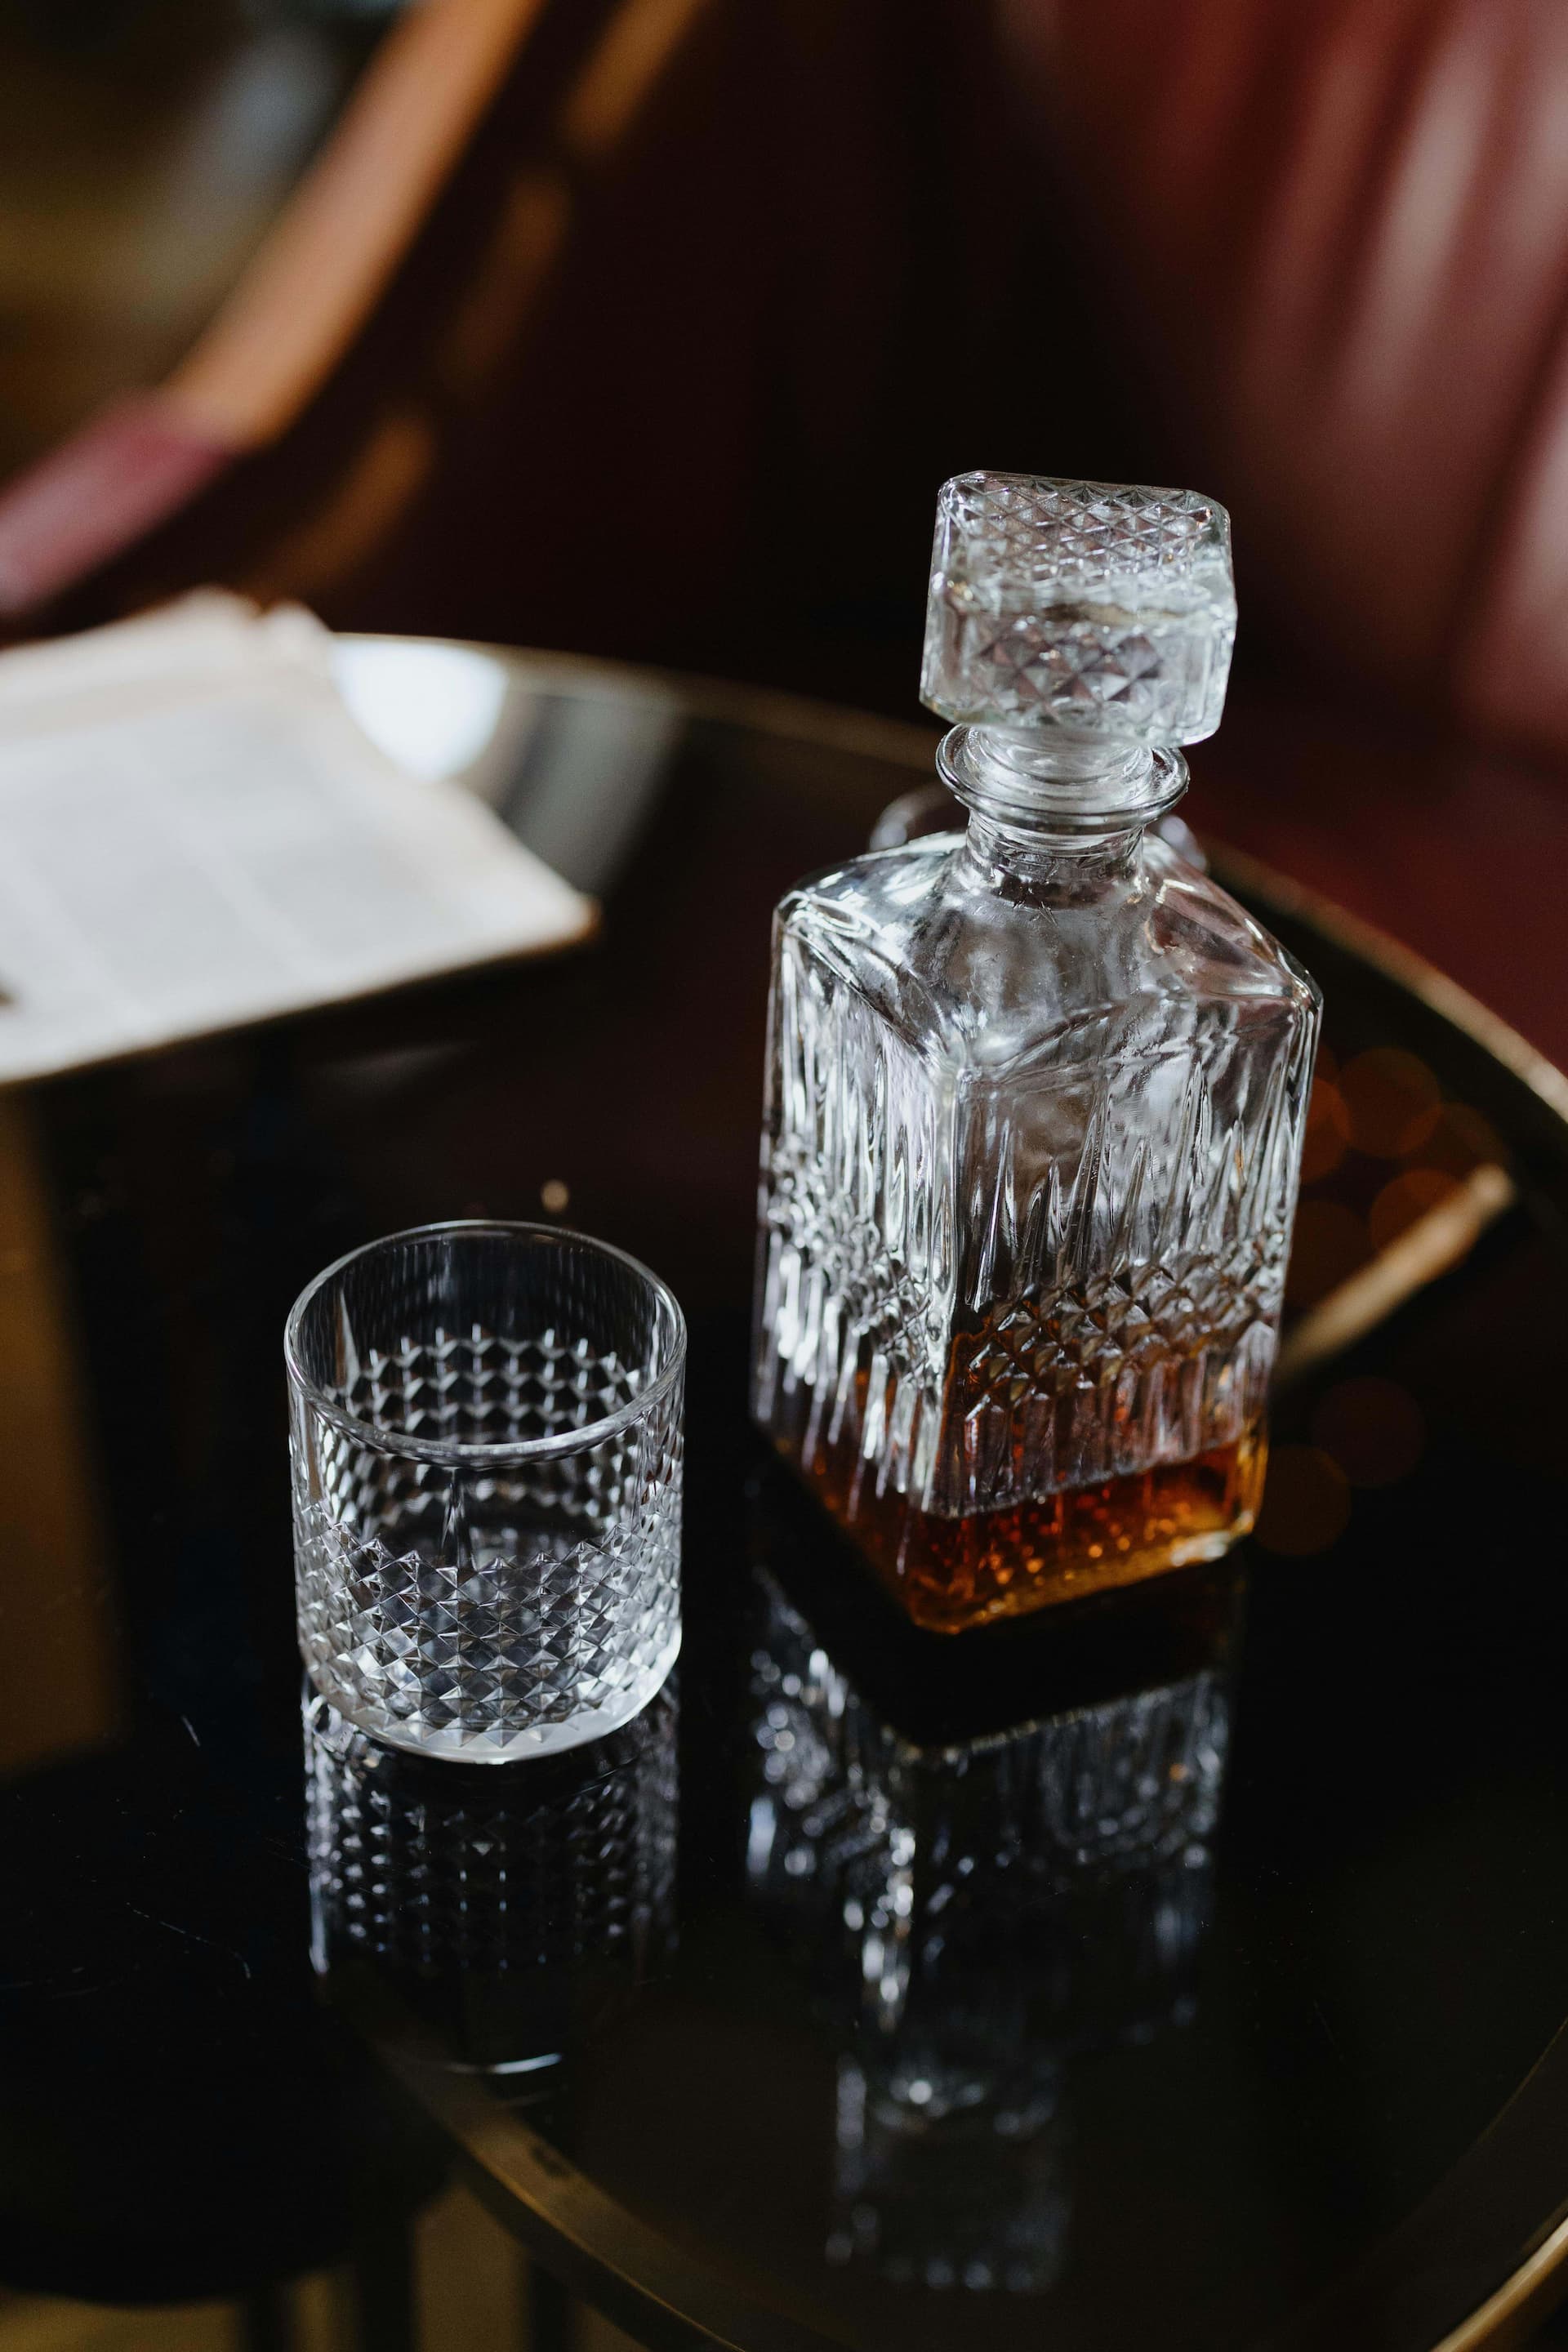 whisky decanter